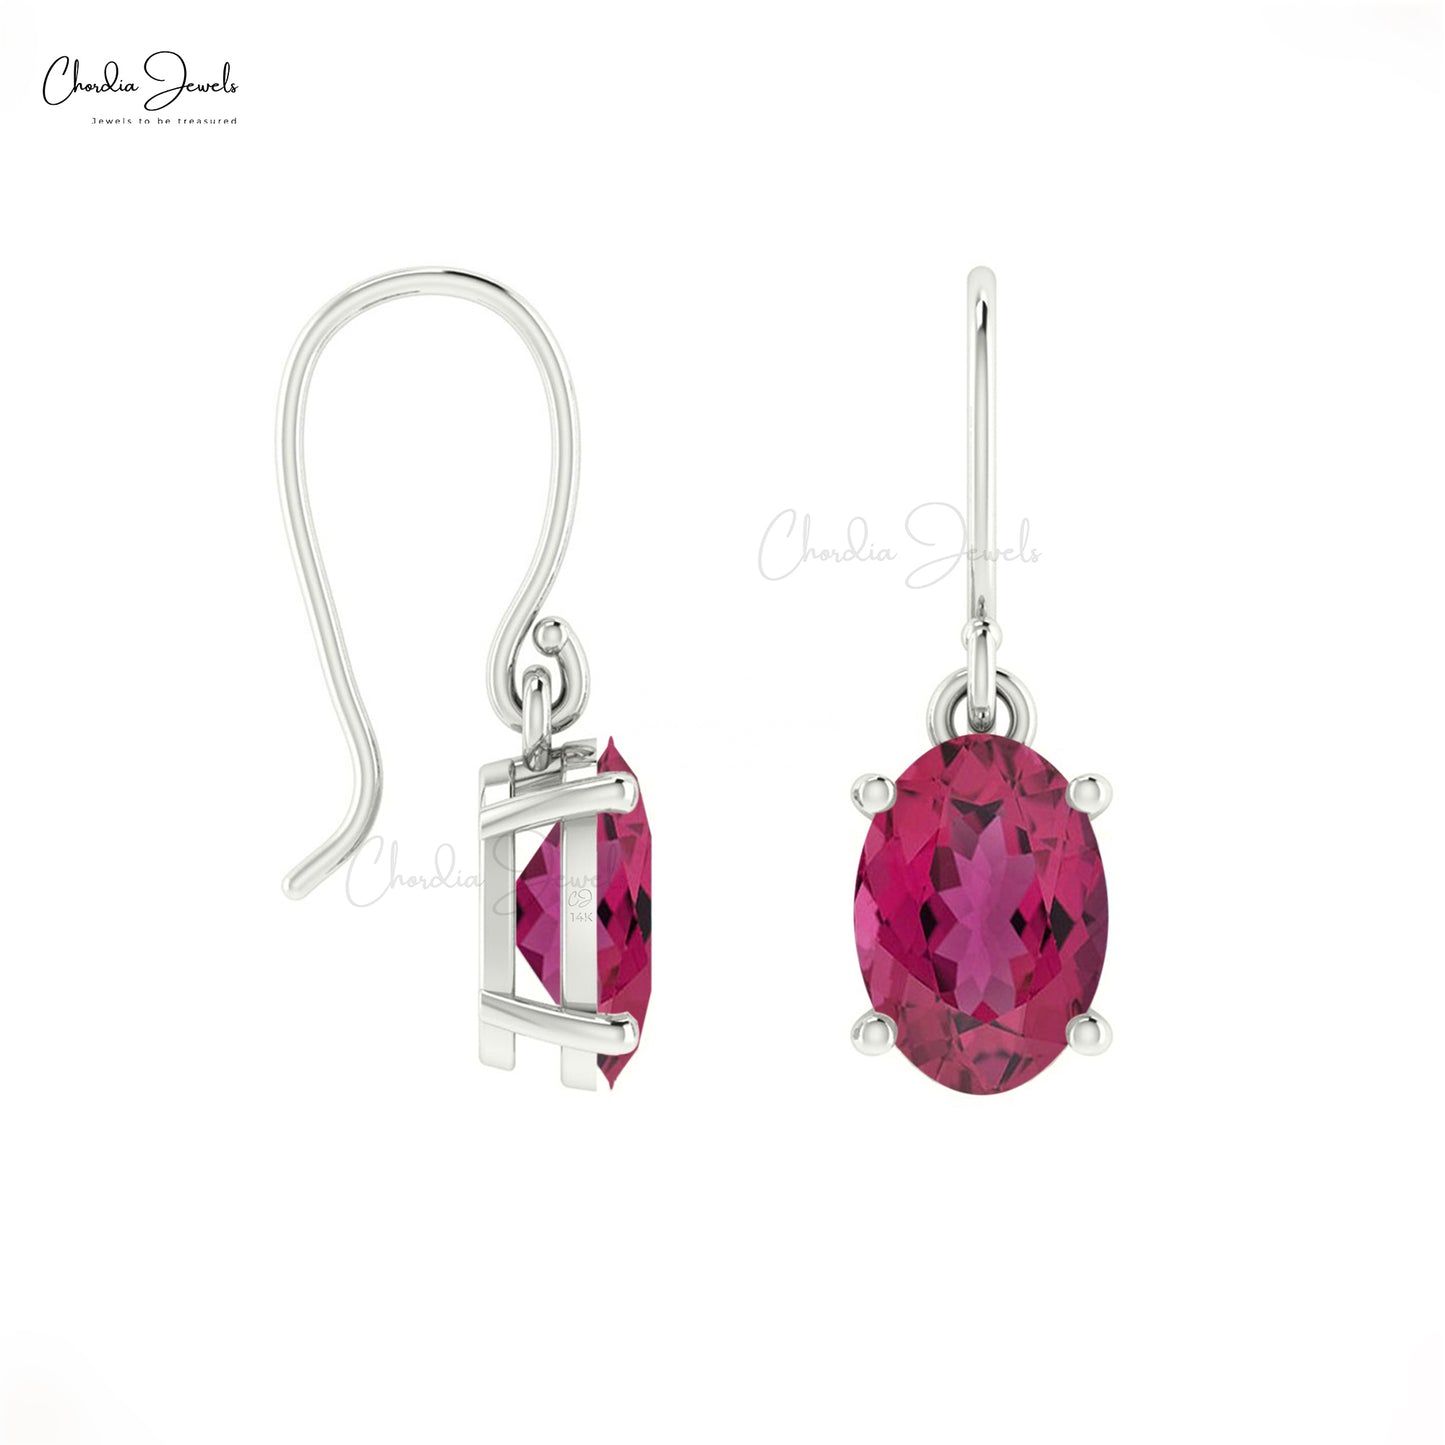 Load image into Gallery viewer, Natural Pink Tourmaline Dangle Earrings 14k Solid Gold White Diamond Fish Hook Earrings For Her
